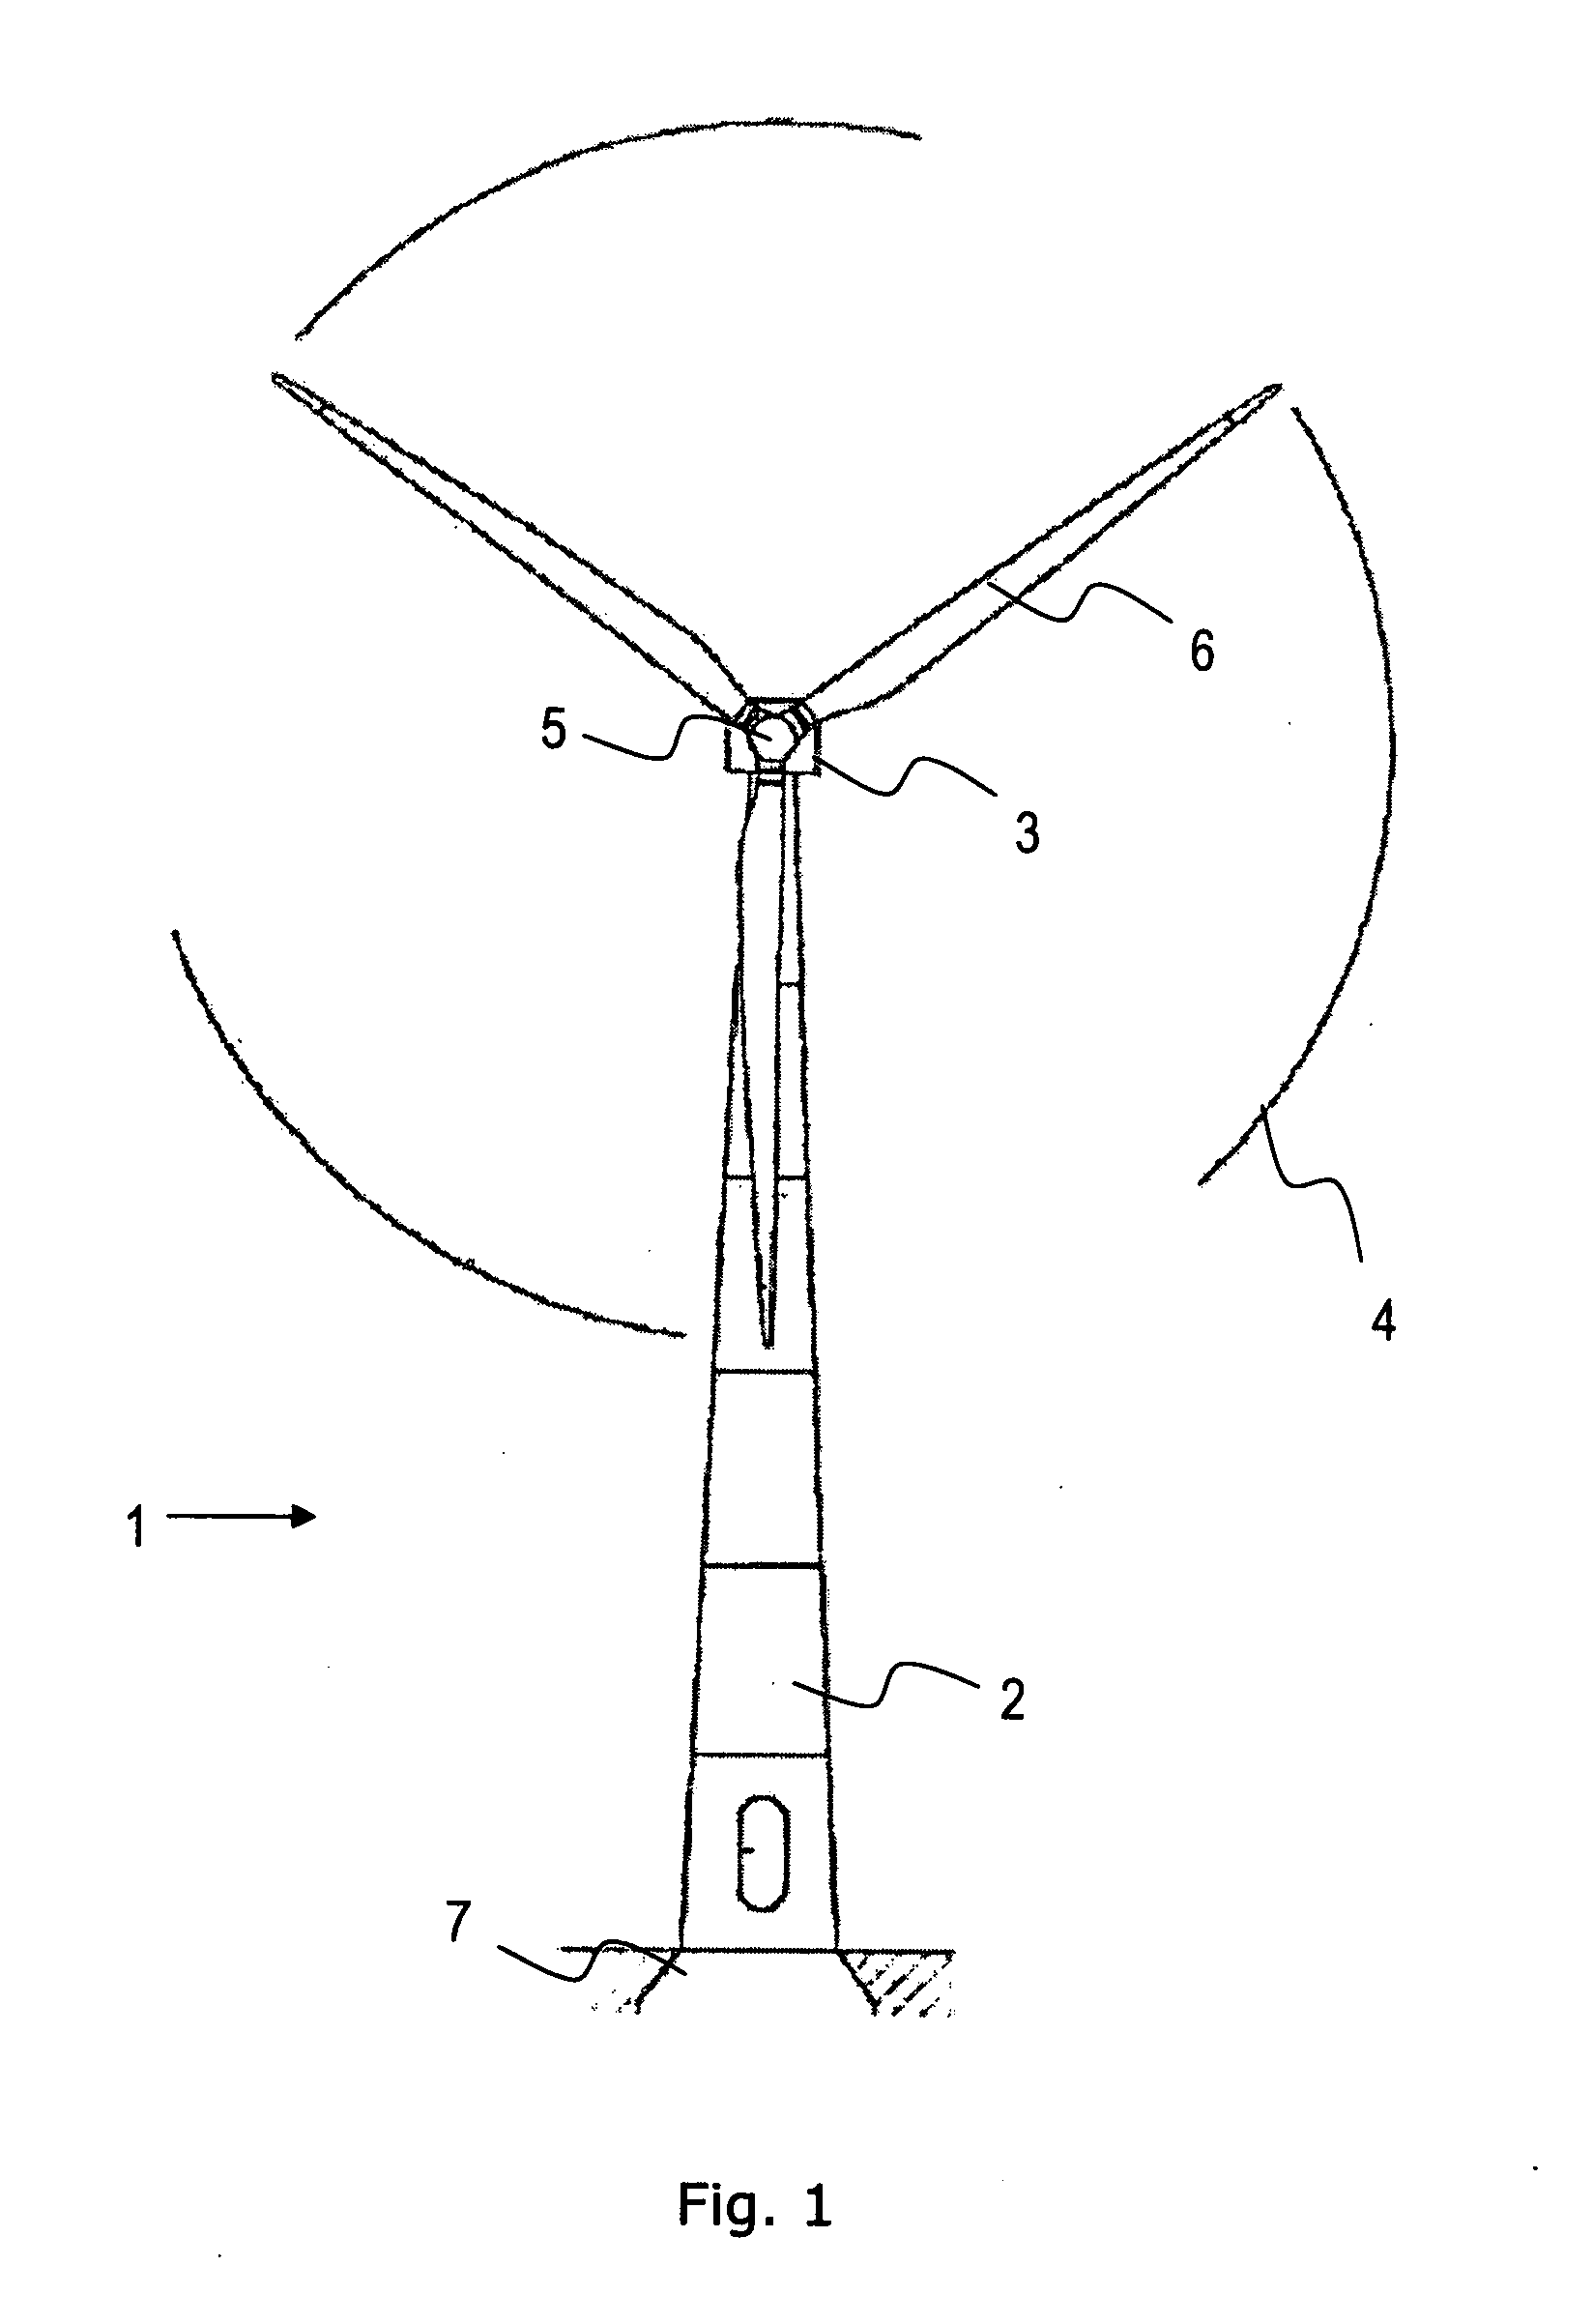 Variable speed wind turbine, and a method for operating the variable speed wind turbine during a power imbalance event